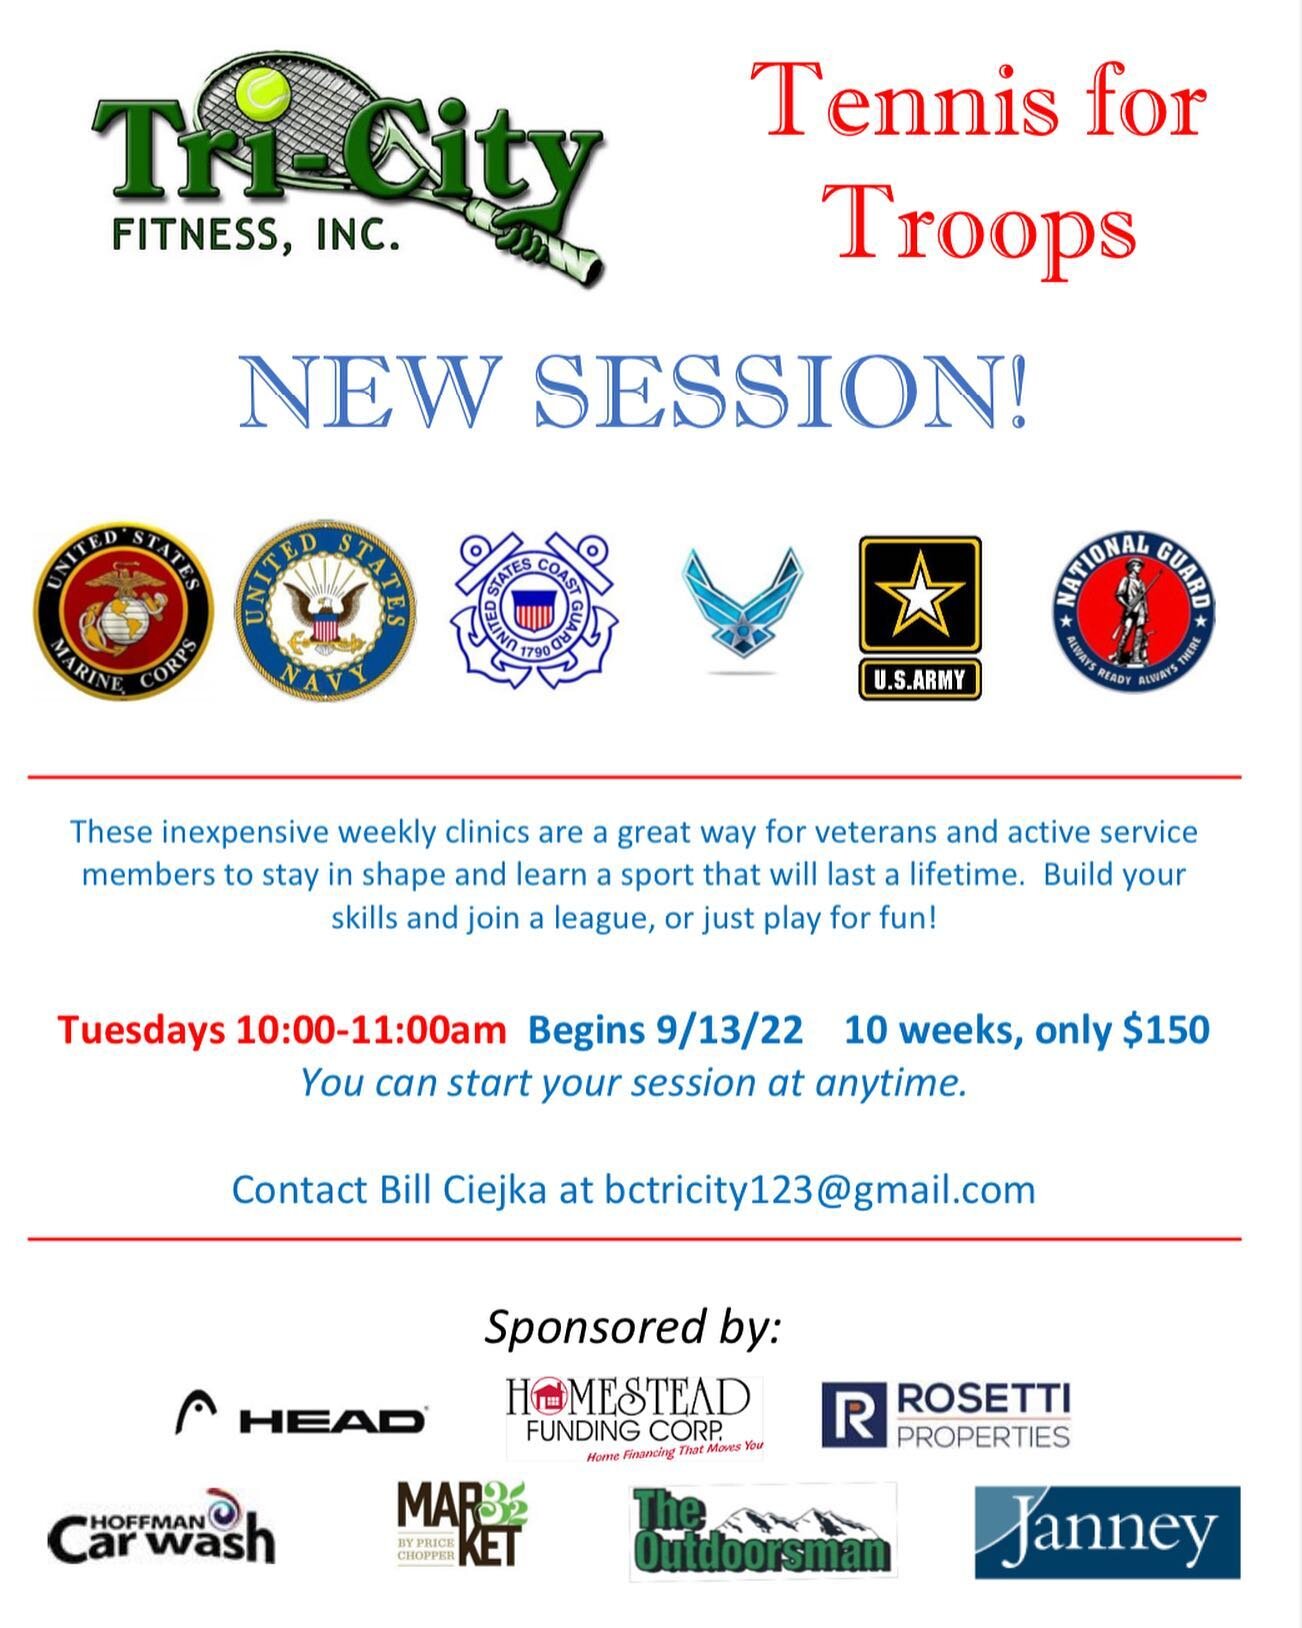 Calling on all Military service members and their family&rsquo;s. Time to start the new session of the Tennis for the Troops clinic.  Please email Billy at bctricity123@gmail.com for more info.  Thank you!